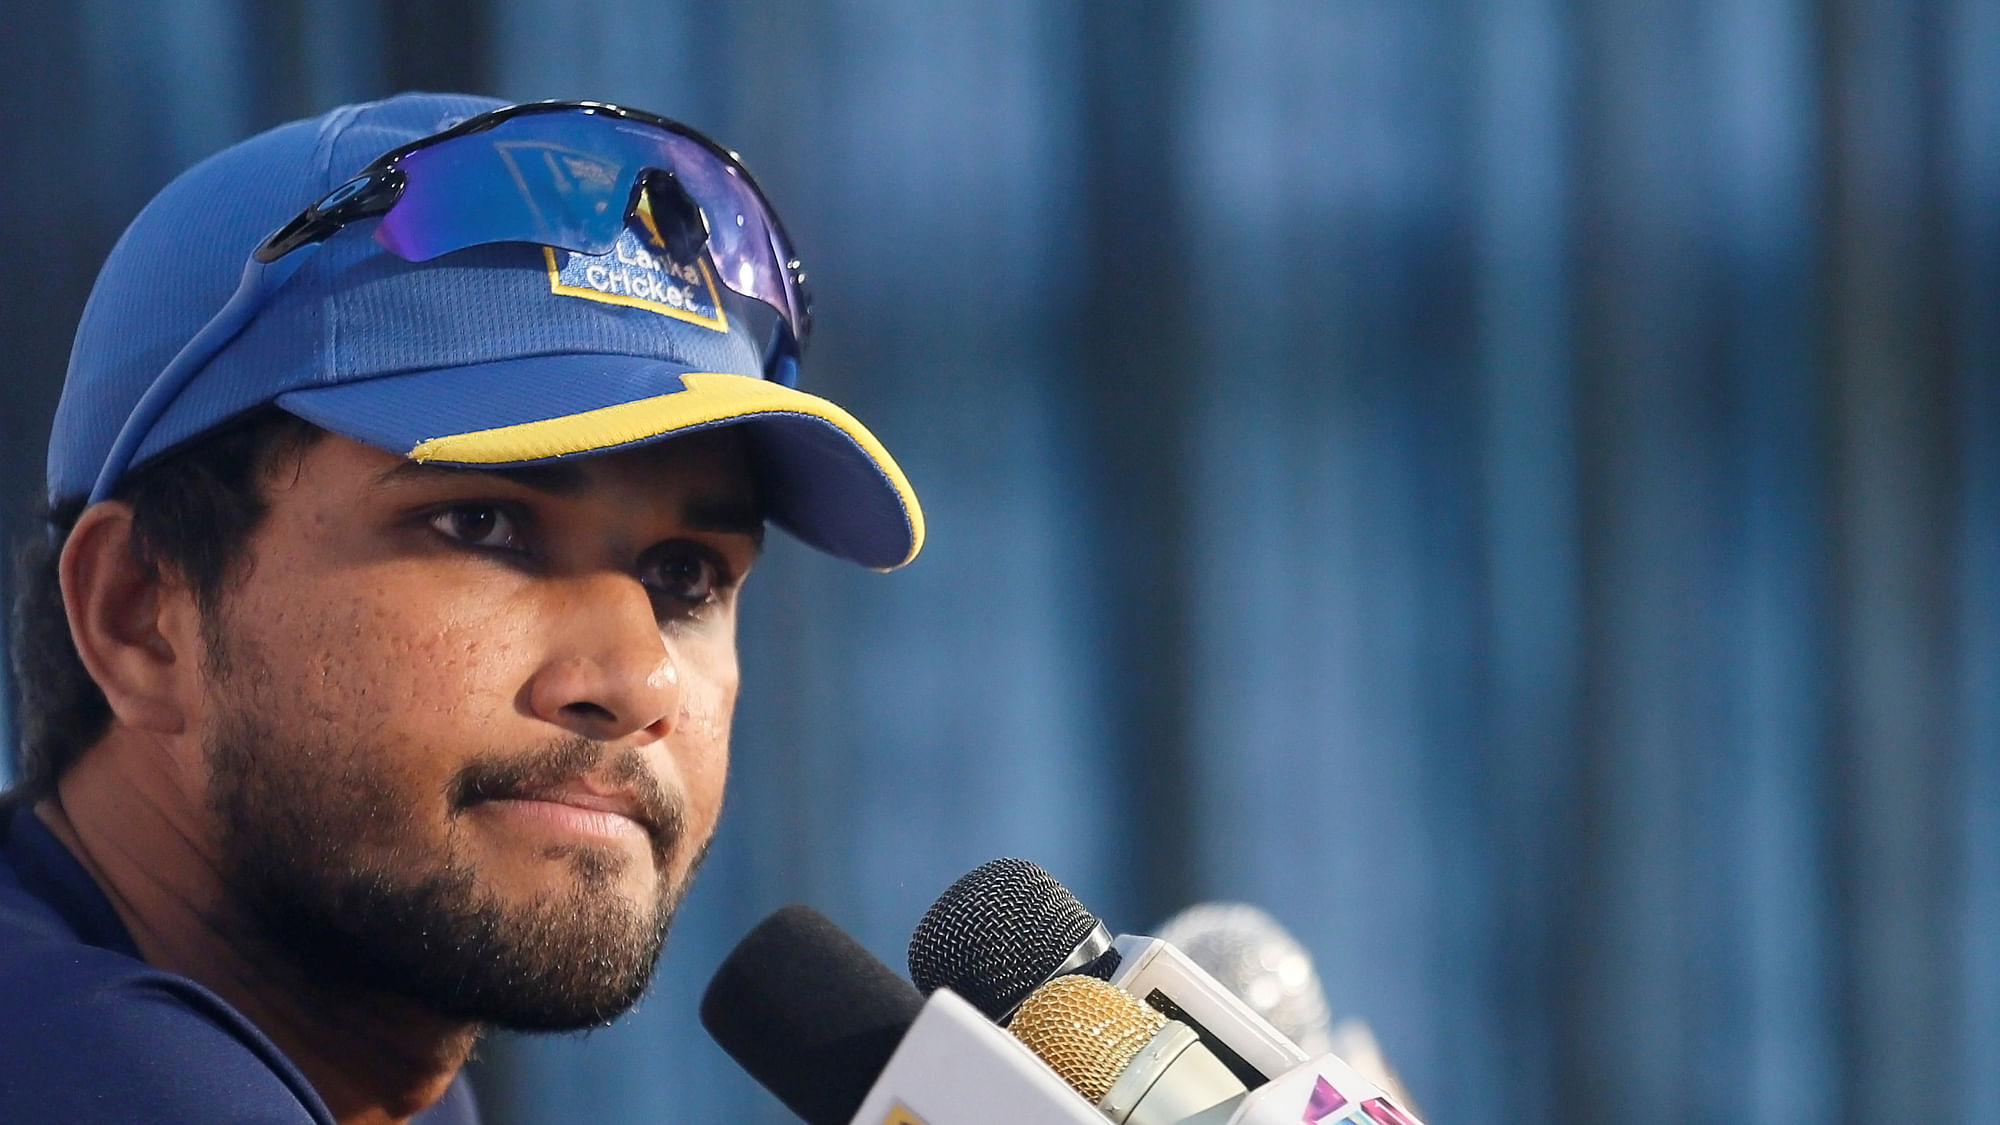 Sri Lanka captain Dinesh Chandimal has been given a 1-Test suspension for ball tampering 